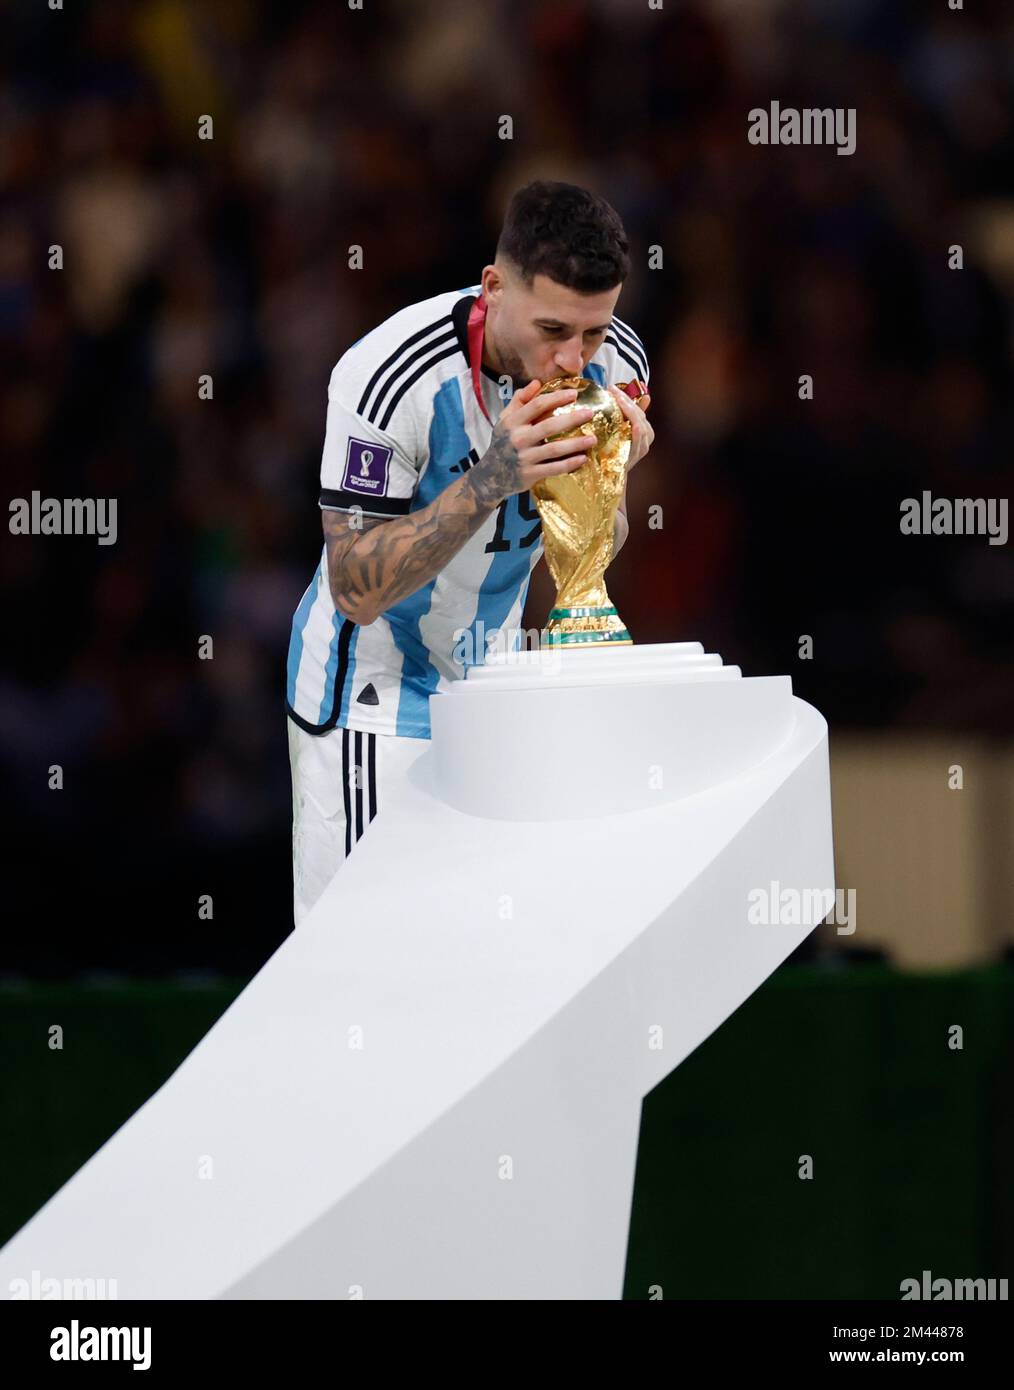 Lusail, Qatar. 18th Dec, 2022. Nicolas Otamendi of Argentina kisses the World Cup Trophy during the awarding ceremony of the 2022 FIFA World Cup at Lusail Stadium in Lusail, Qatar, Dec. 18, 2022. Credit: Wang Lili/Xinhua/Alamy Live News Stock Photo